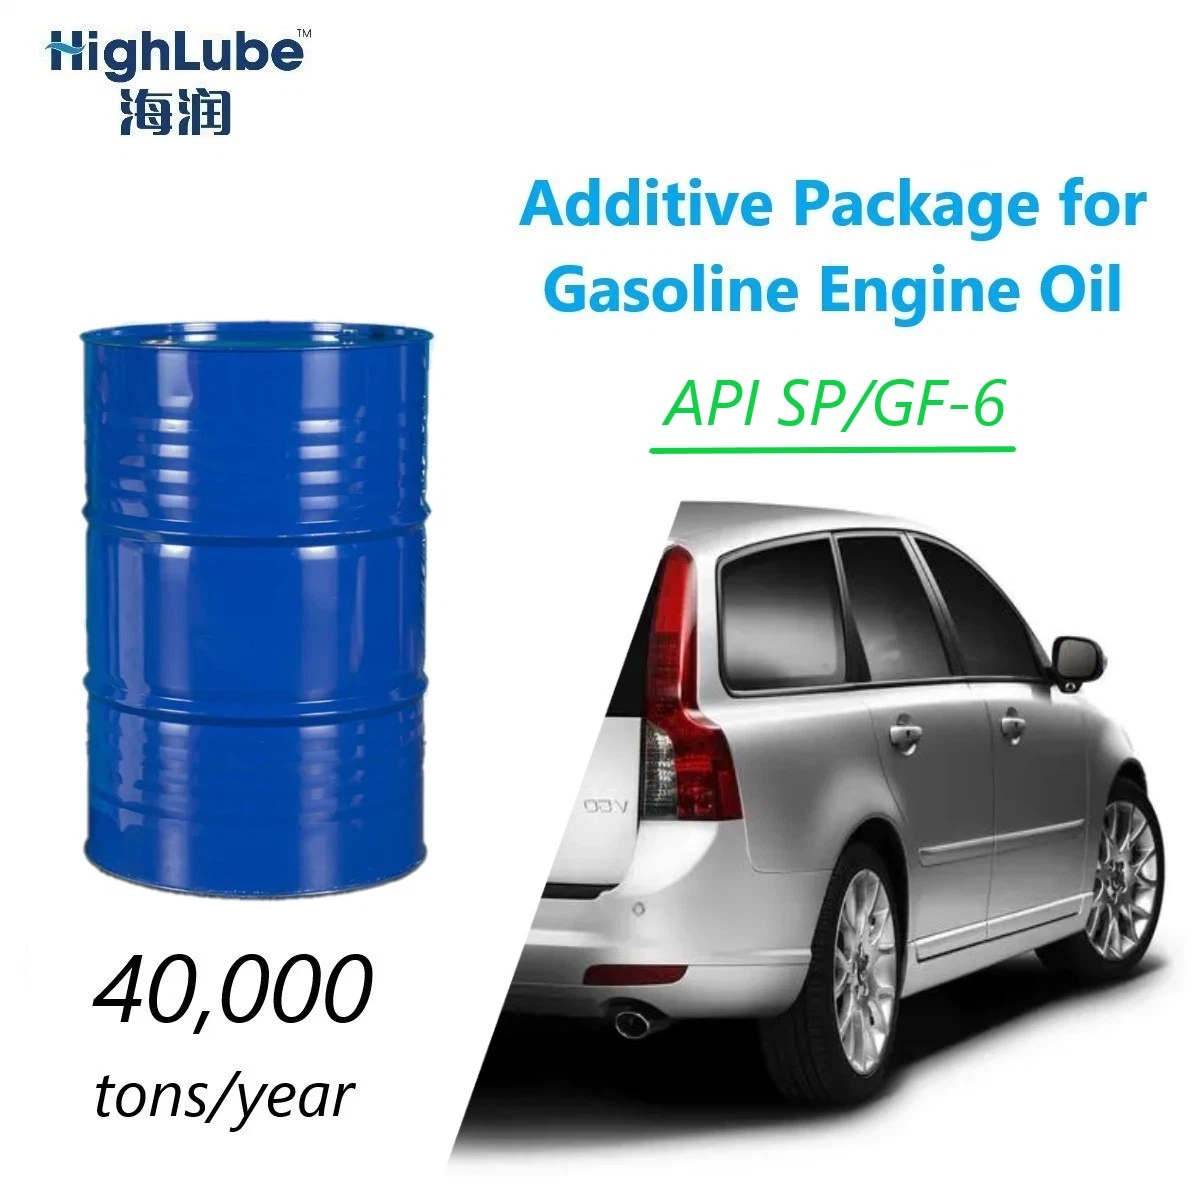 Combustion Engine Oil Package, Vehicle Oil Additive Package, API Sp-GF-6